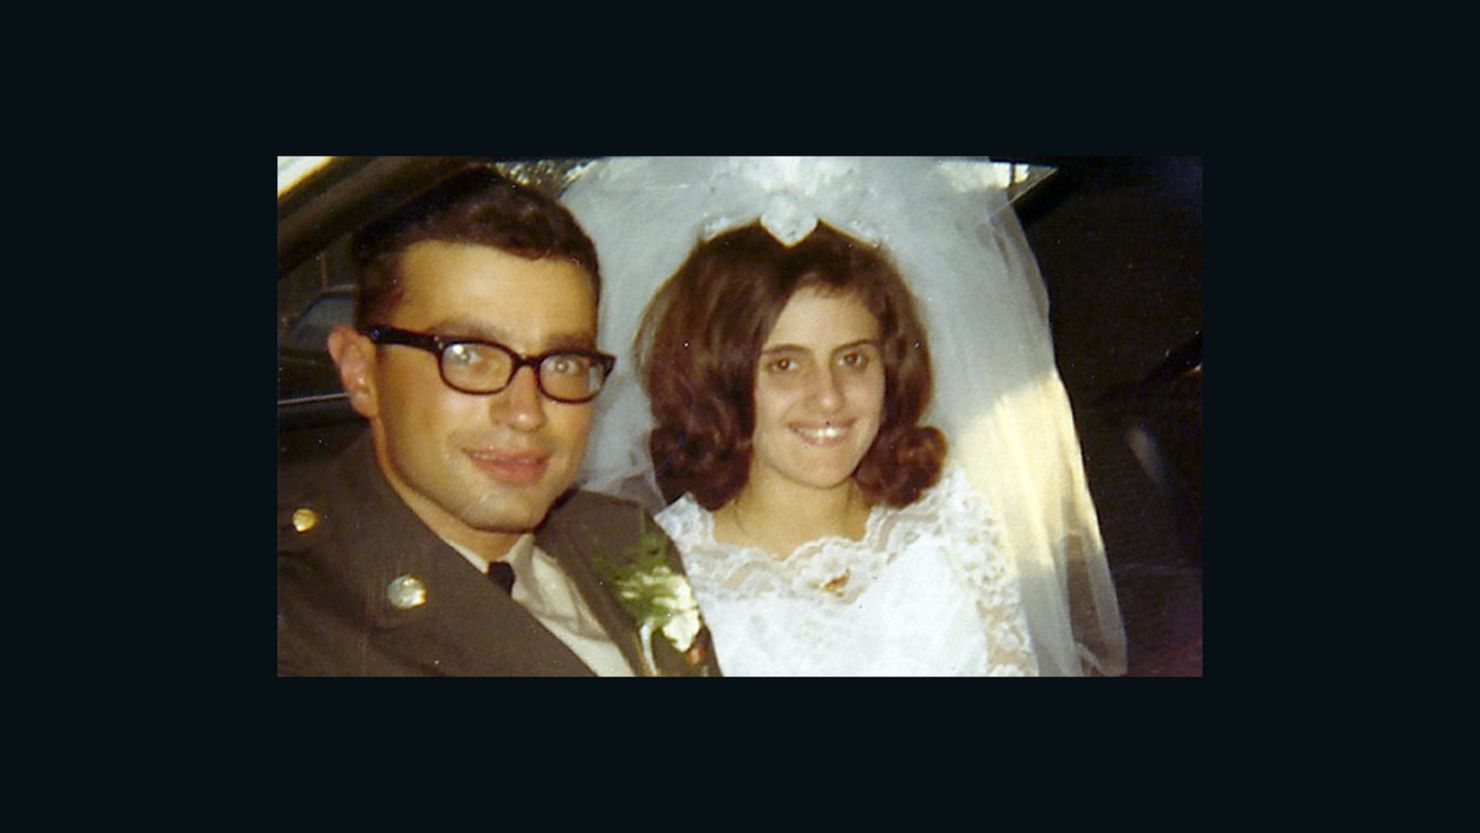 Spec. Leslie Sabo Jr. and Rose Mary on their wedding day in 1969. He died heroically in Cambodia a few months later.